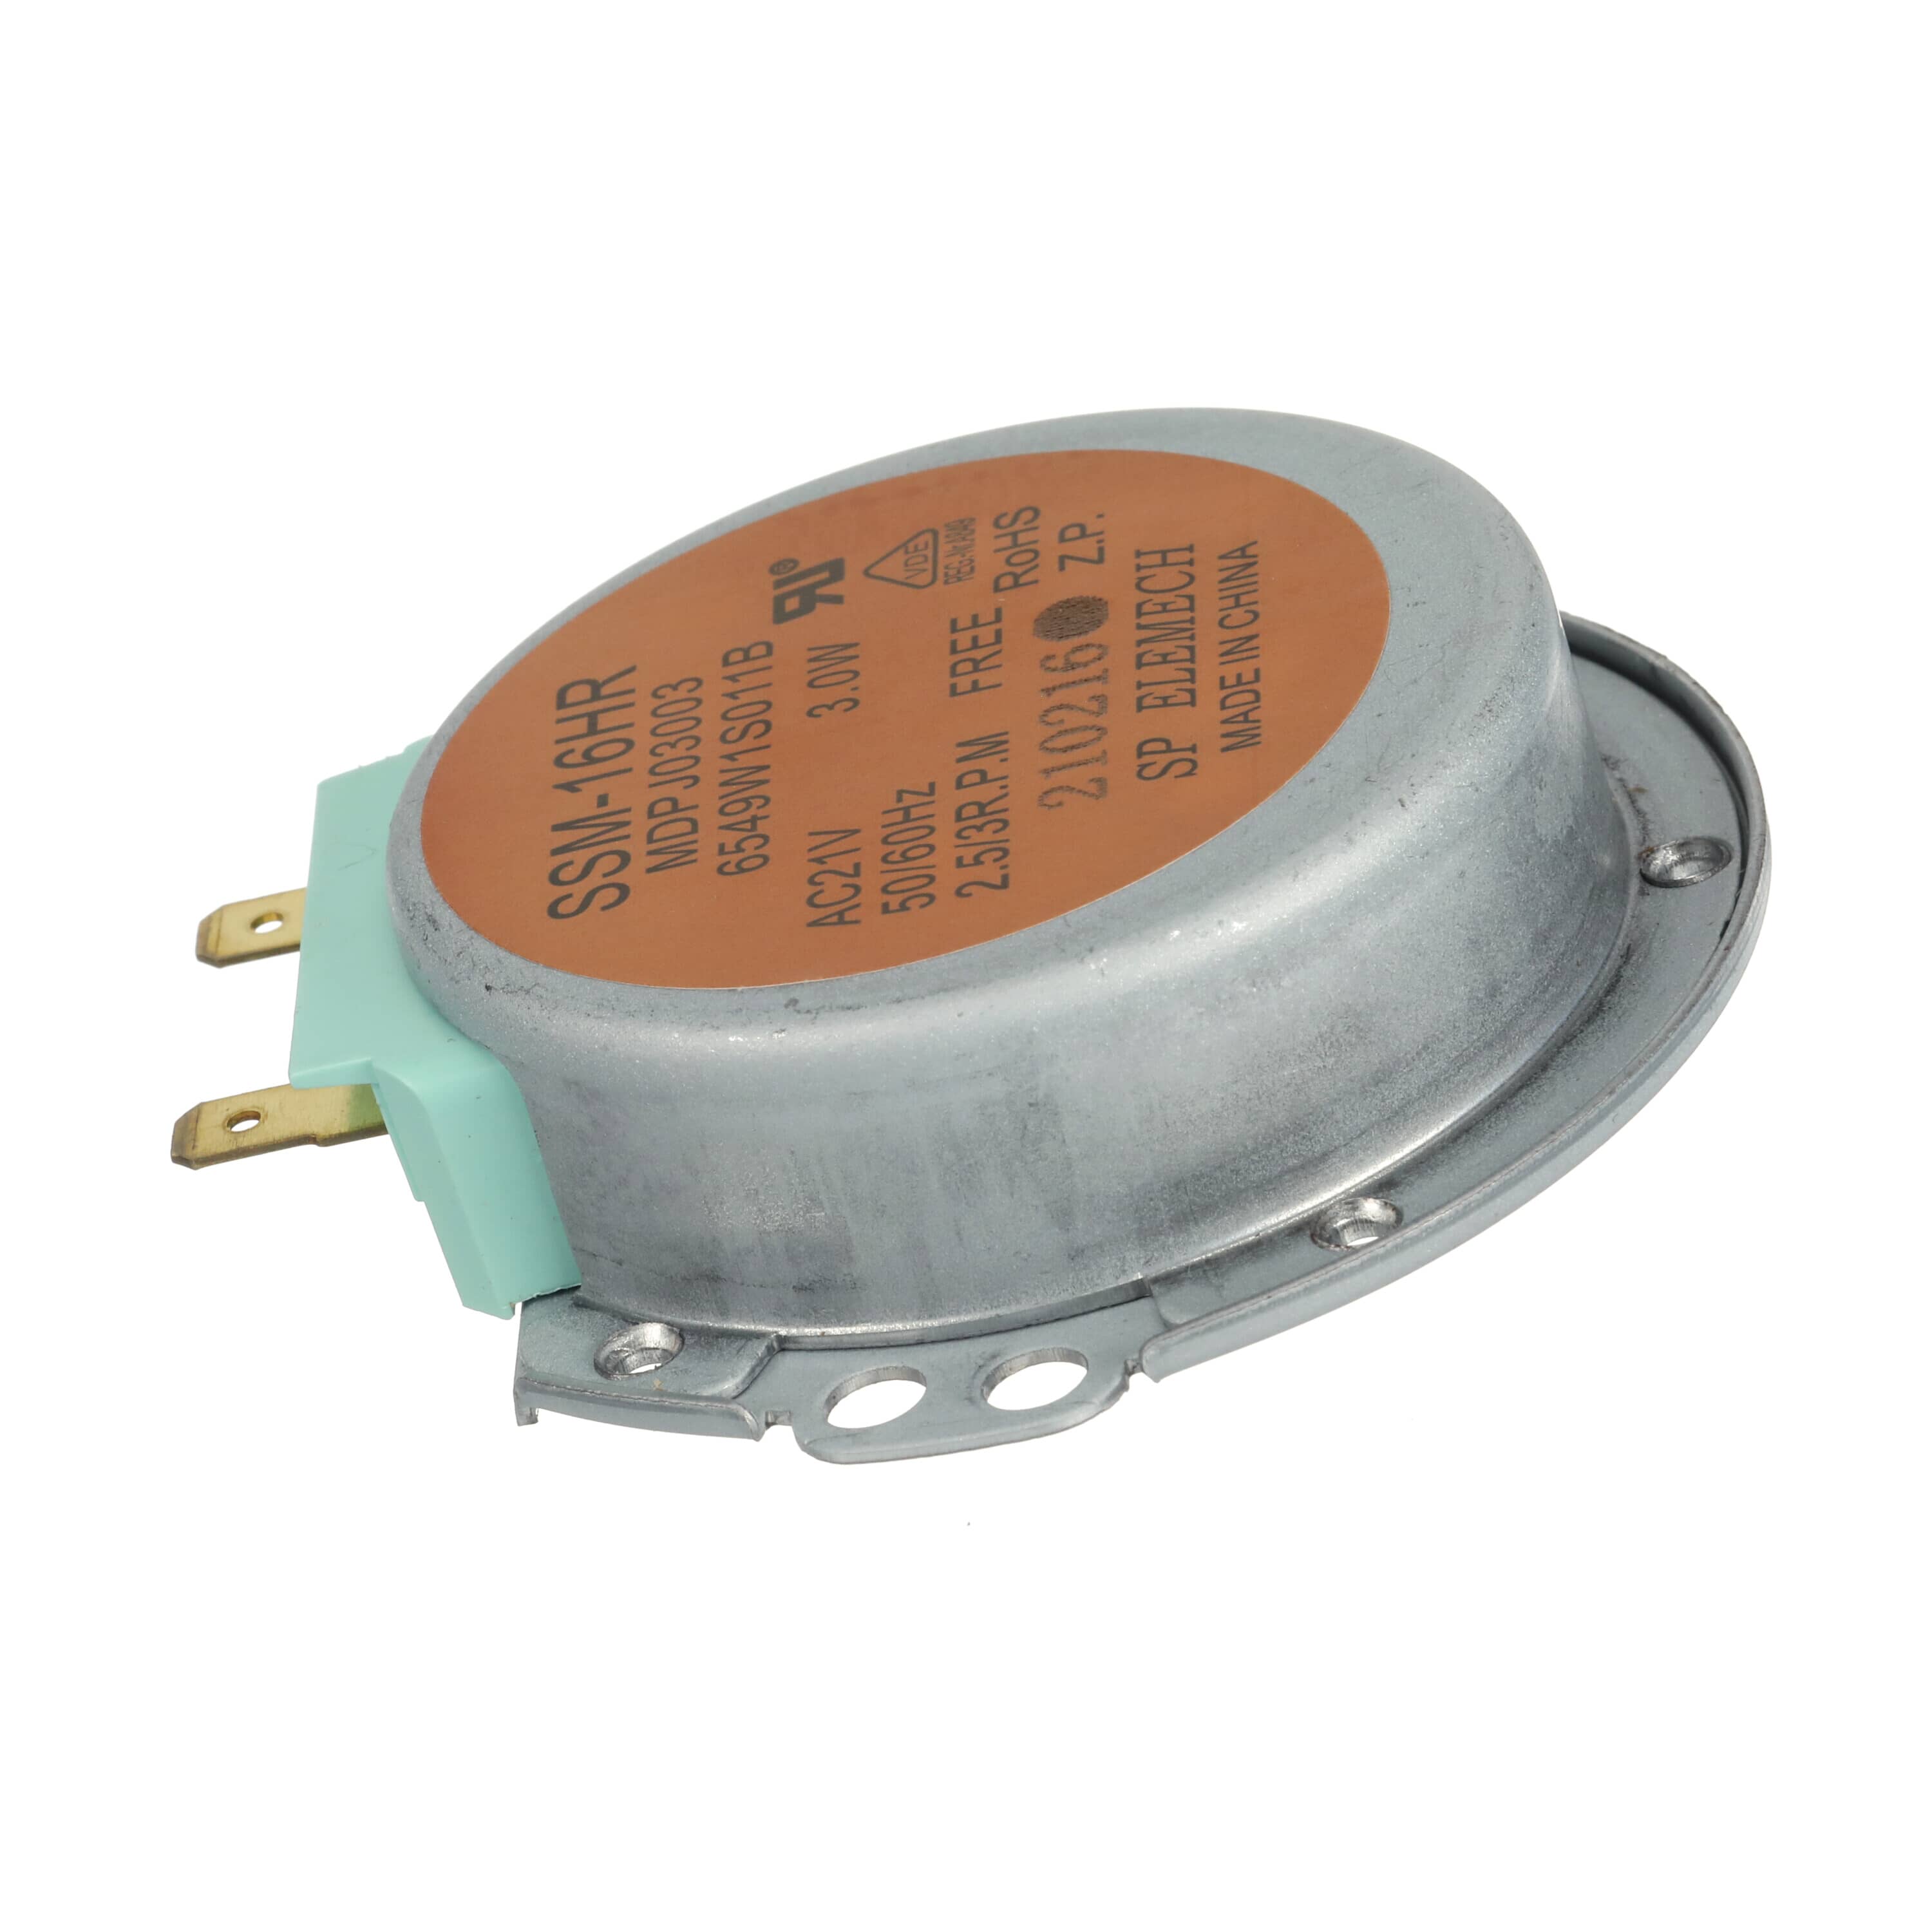 LG 6549W1S011B Microwave Turntable Motor, Ac Synchronous